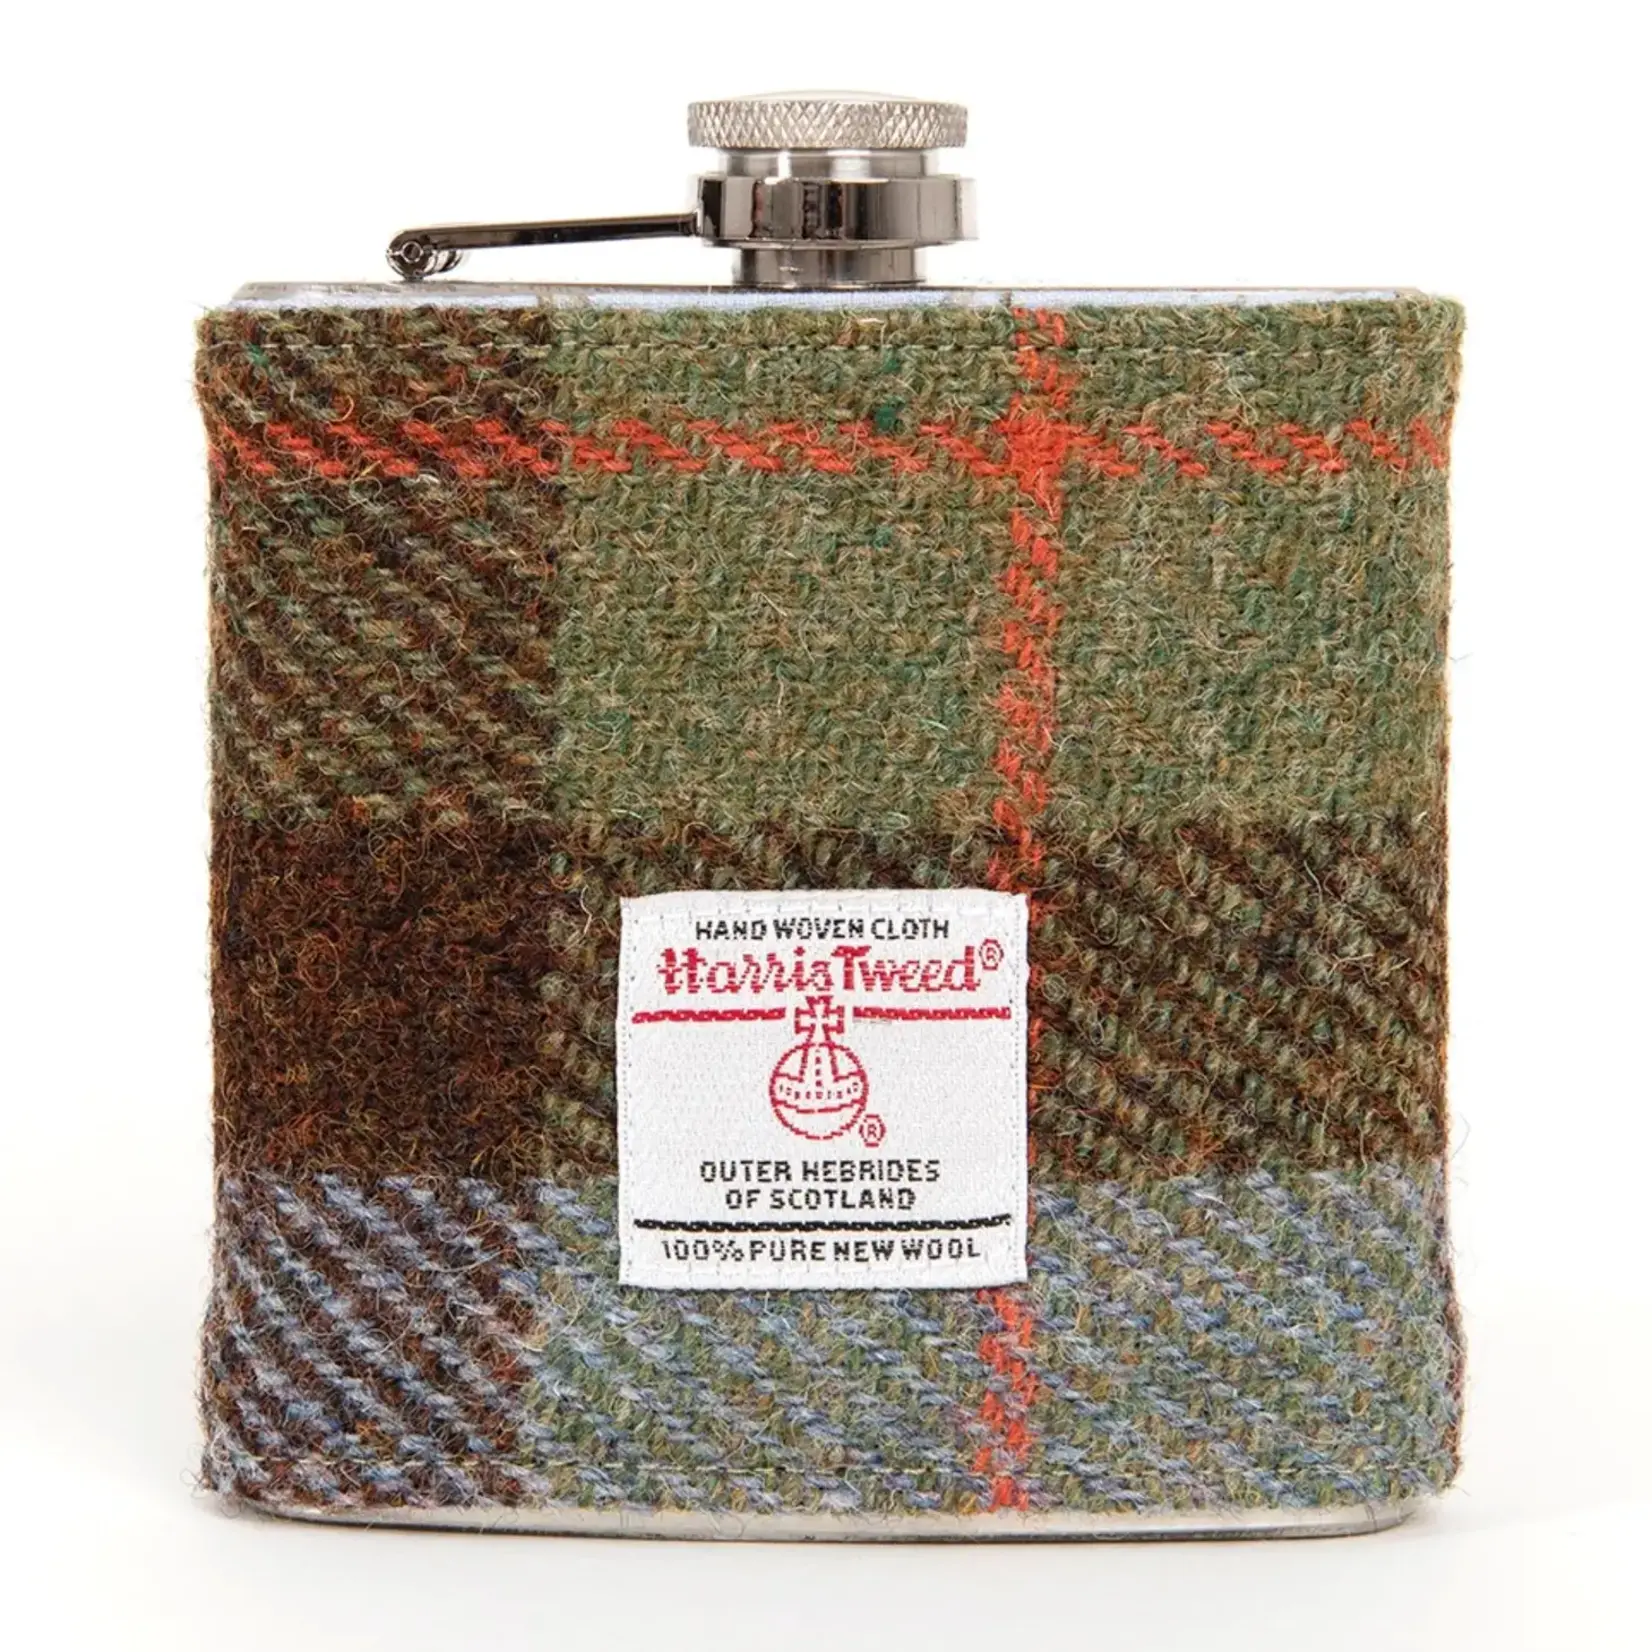 Created by the Ridleys Flannel Flask